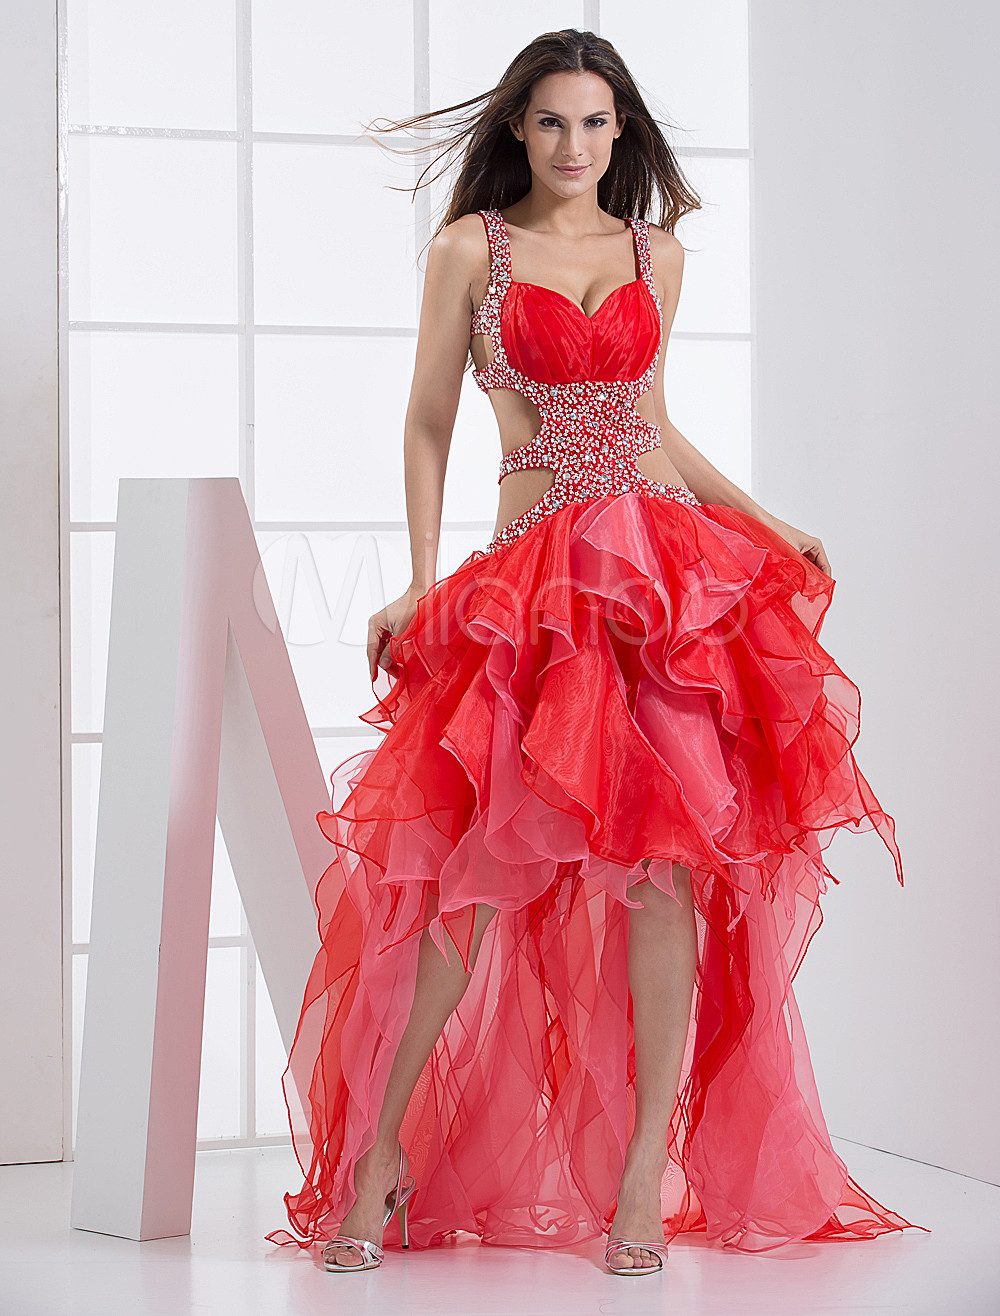 Red Tulle Sweetheart A-line Long in Back Short in Front Cocktail Dress (Wedding Prom Dresses) photo